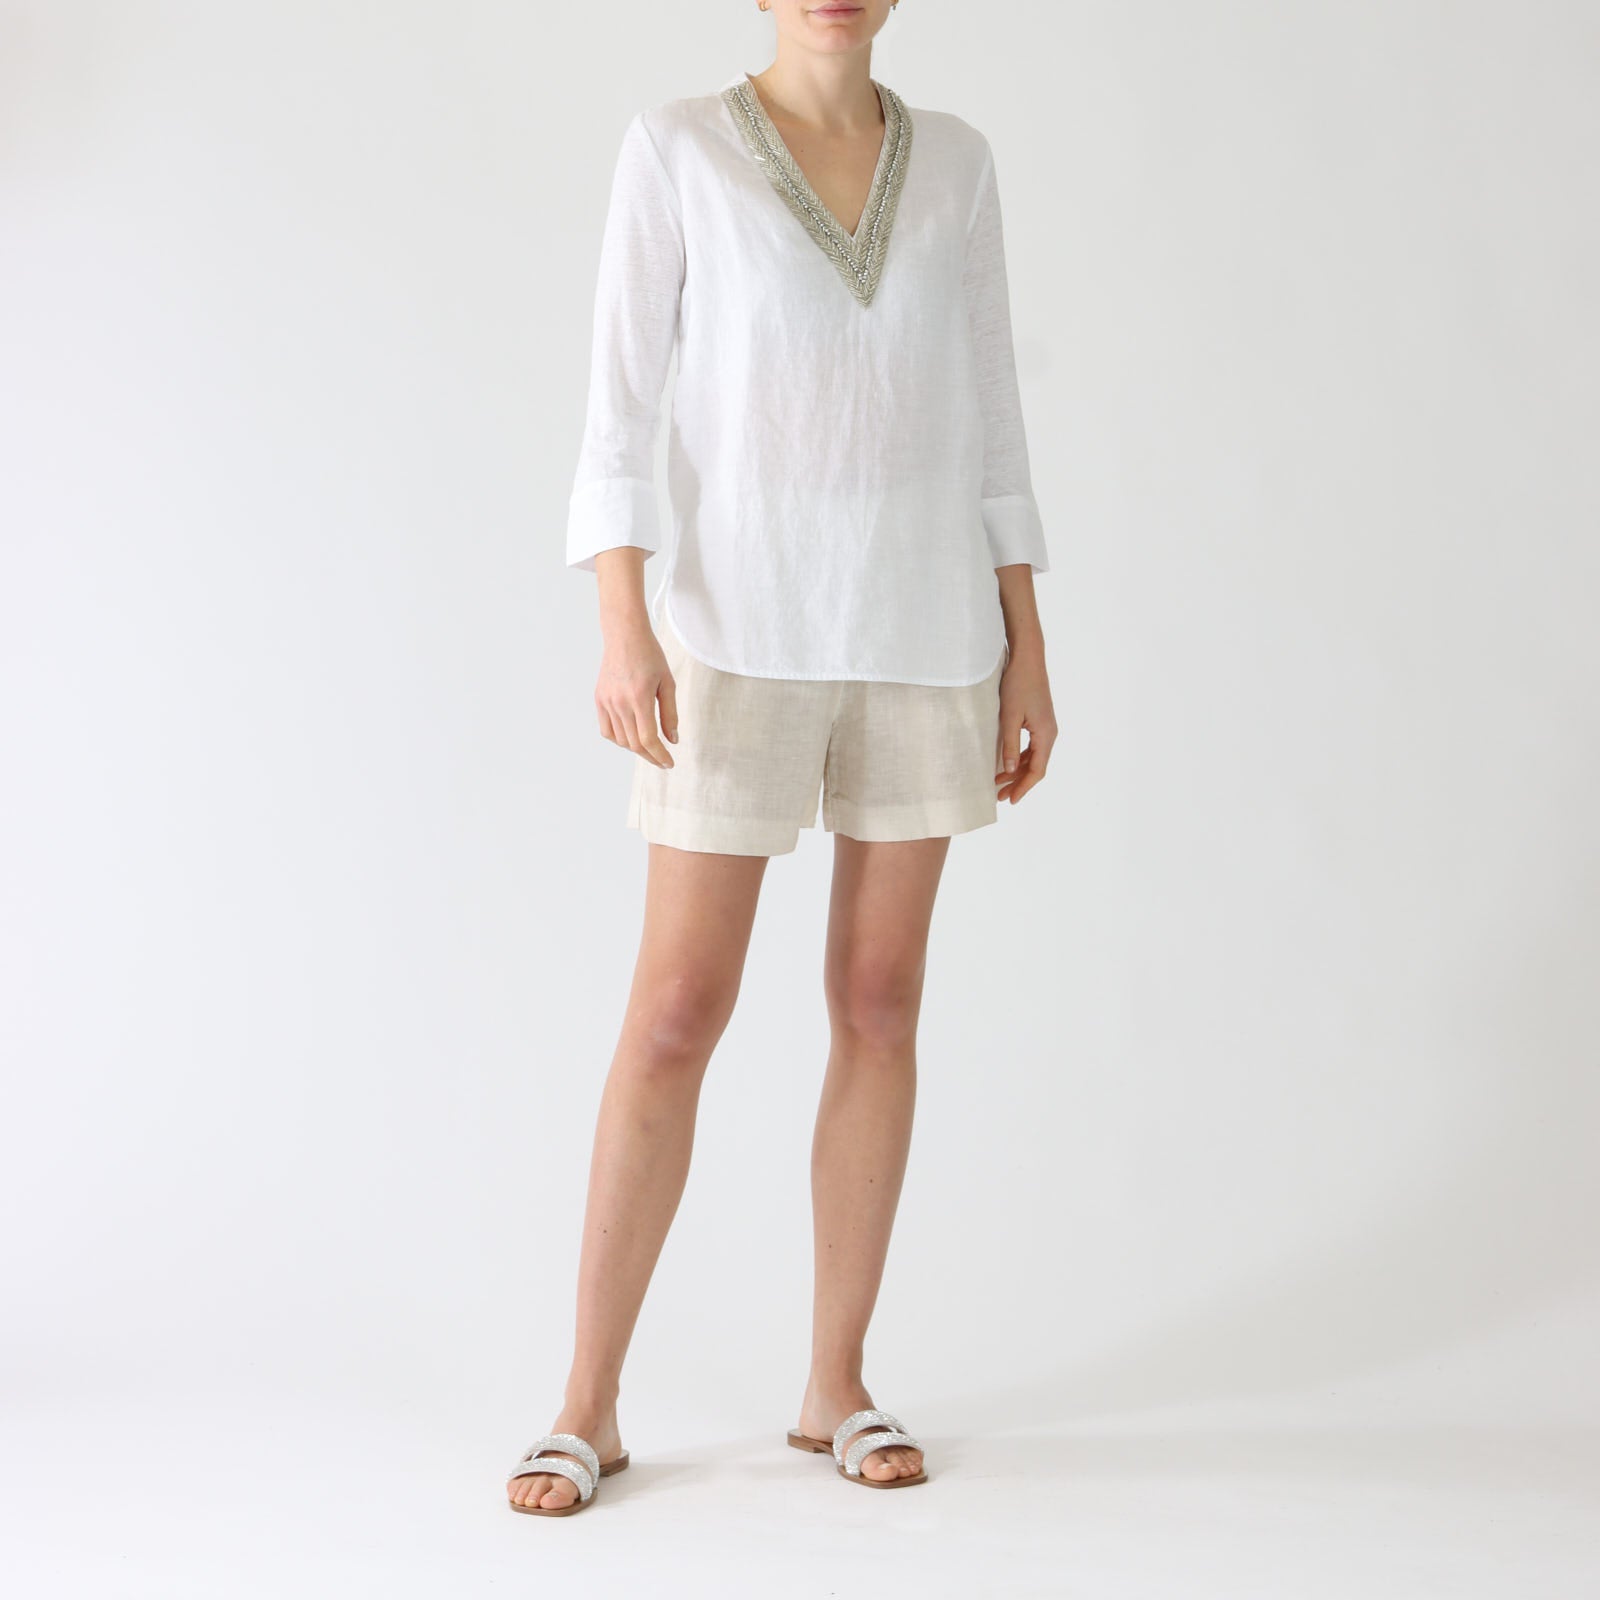 White Linen Top With Beaded Trim